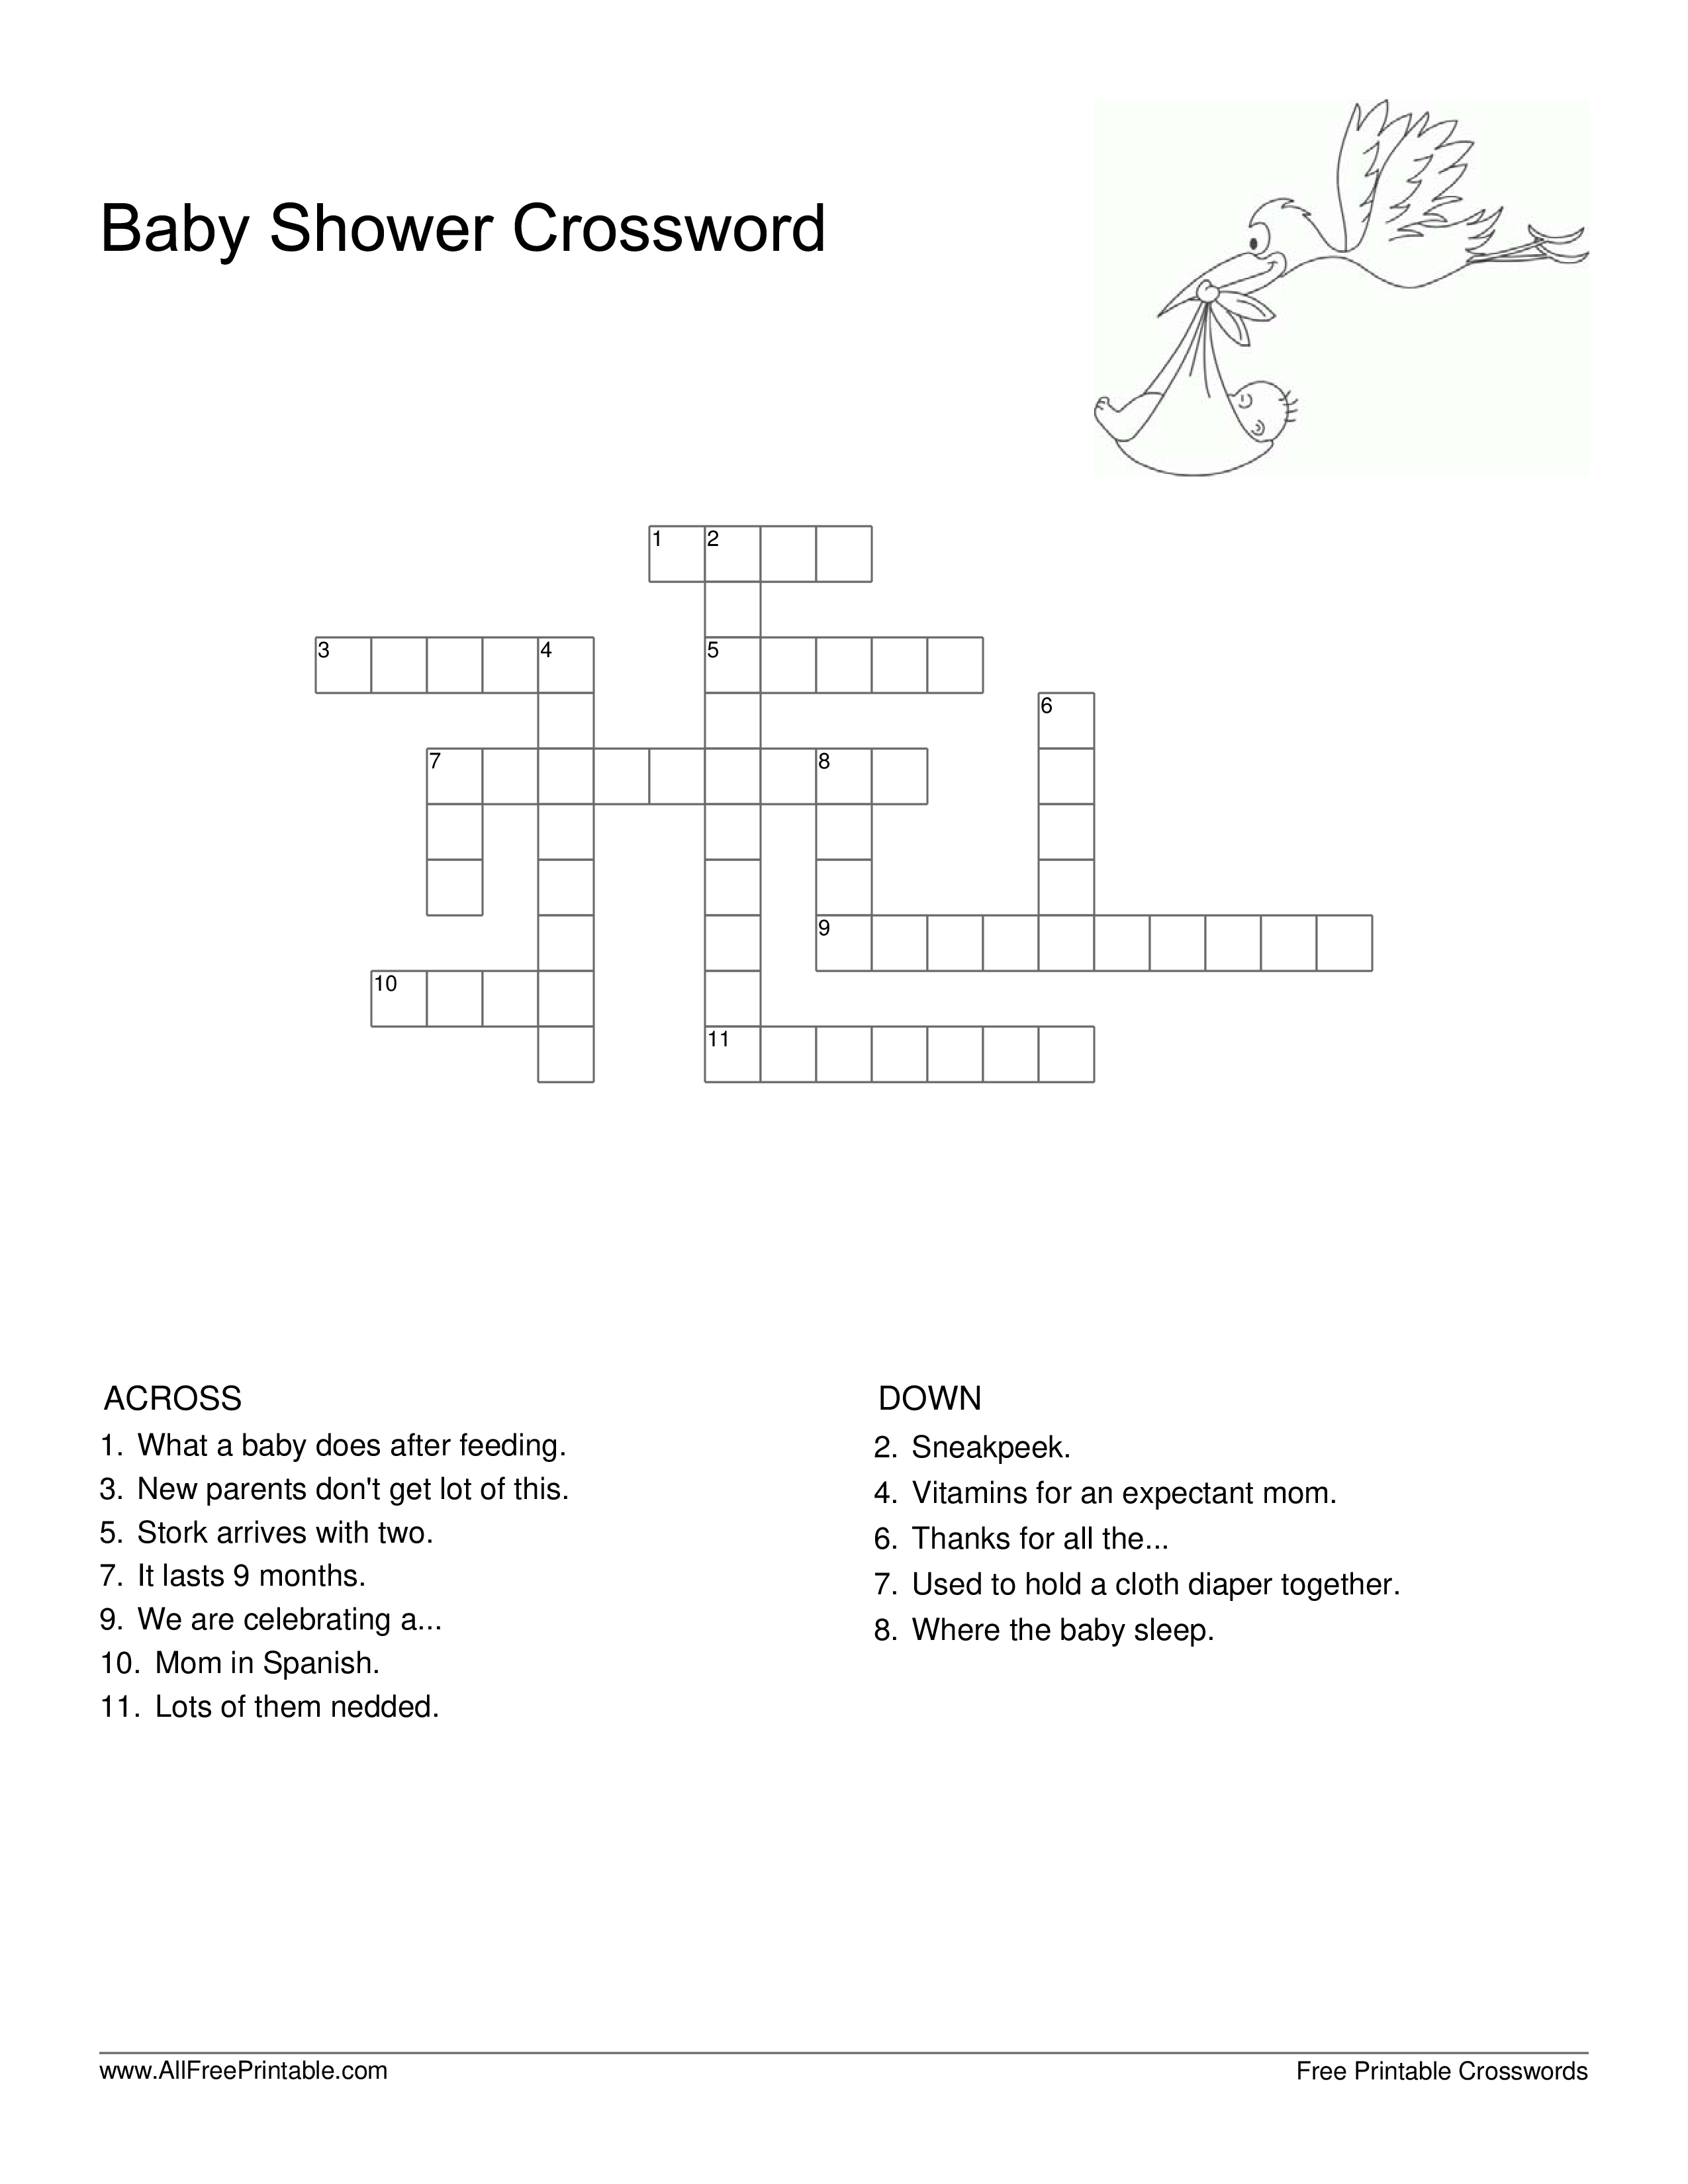 Crosswords Puzzle Baby Shower | Templates At Allbusinesstemplates - Printable Crossword Puzzles For Baby Shower